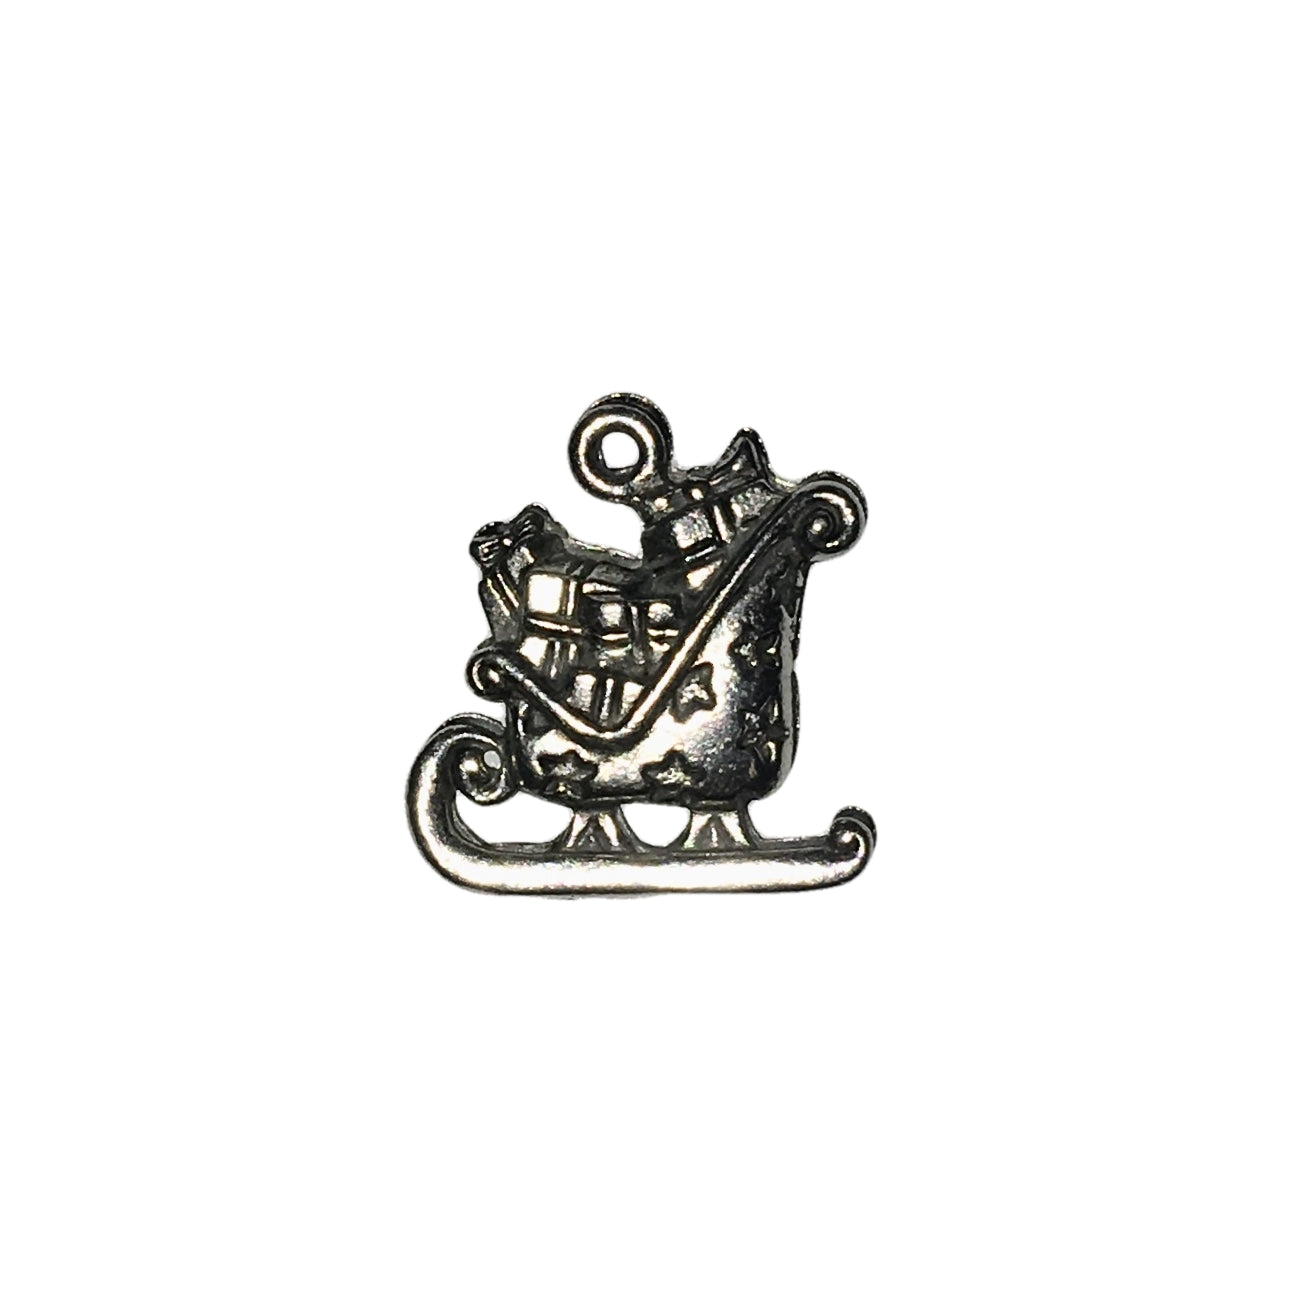 Sleigh with Presents Charms - Qty 5 - Lead Free Pewter Silver - American Made